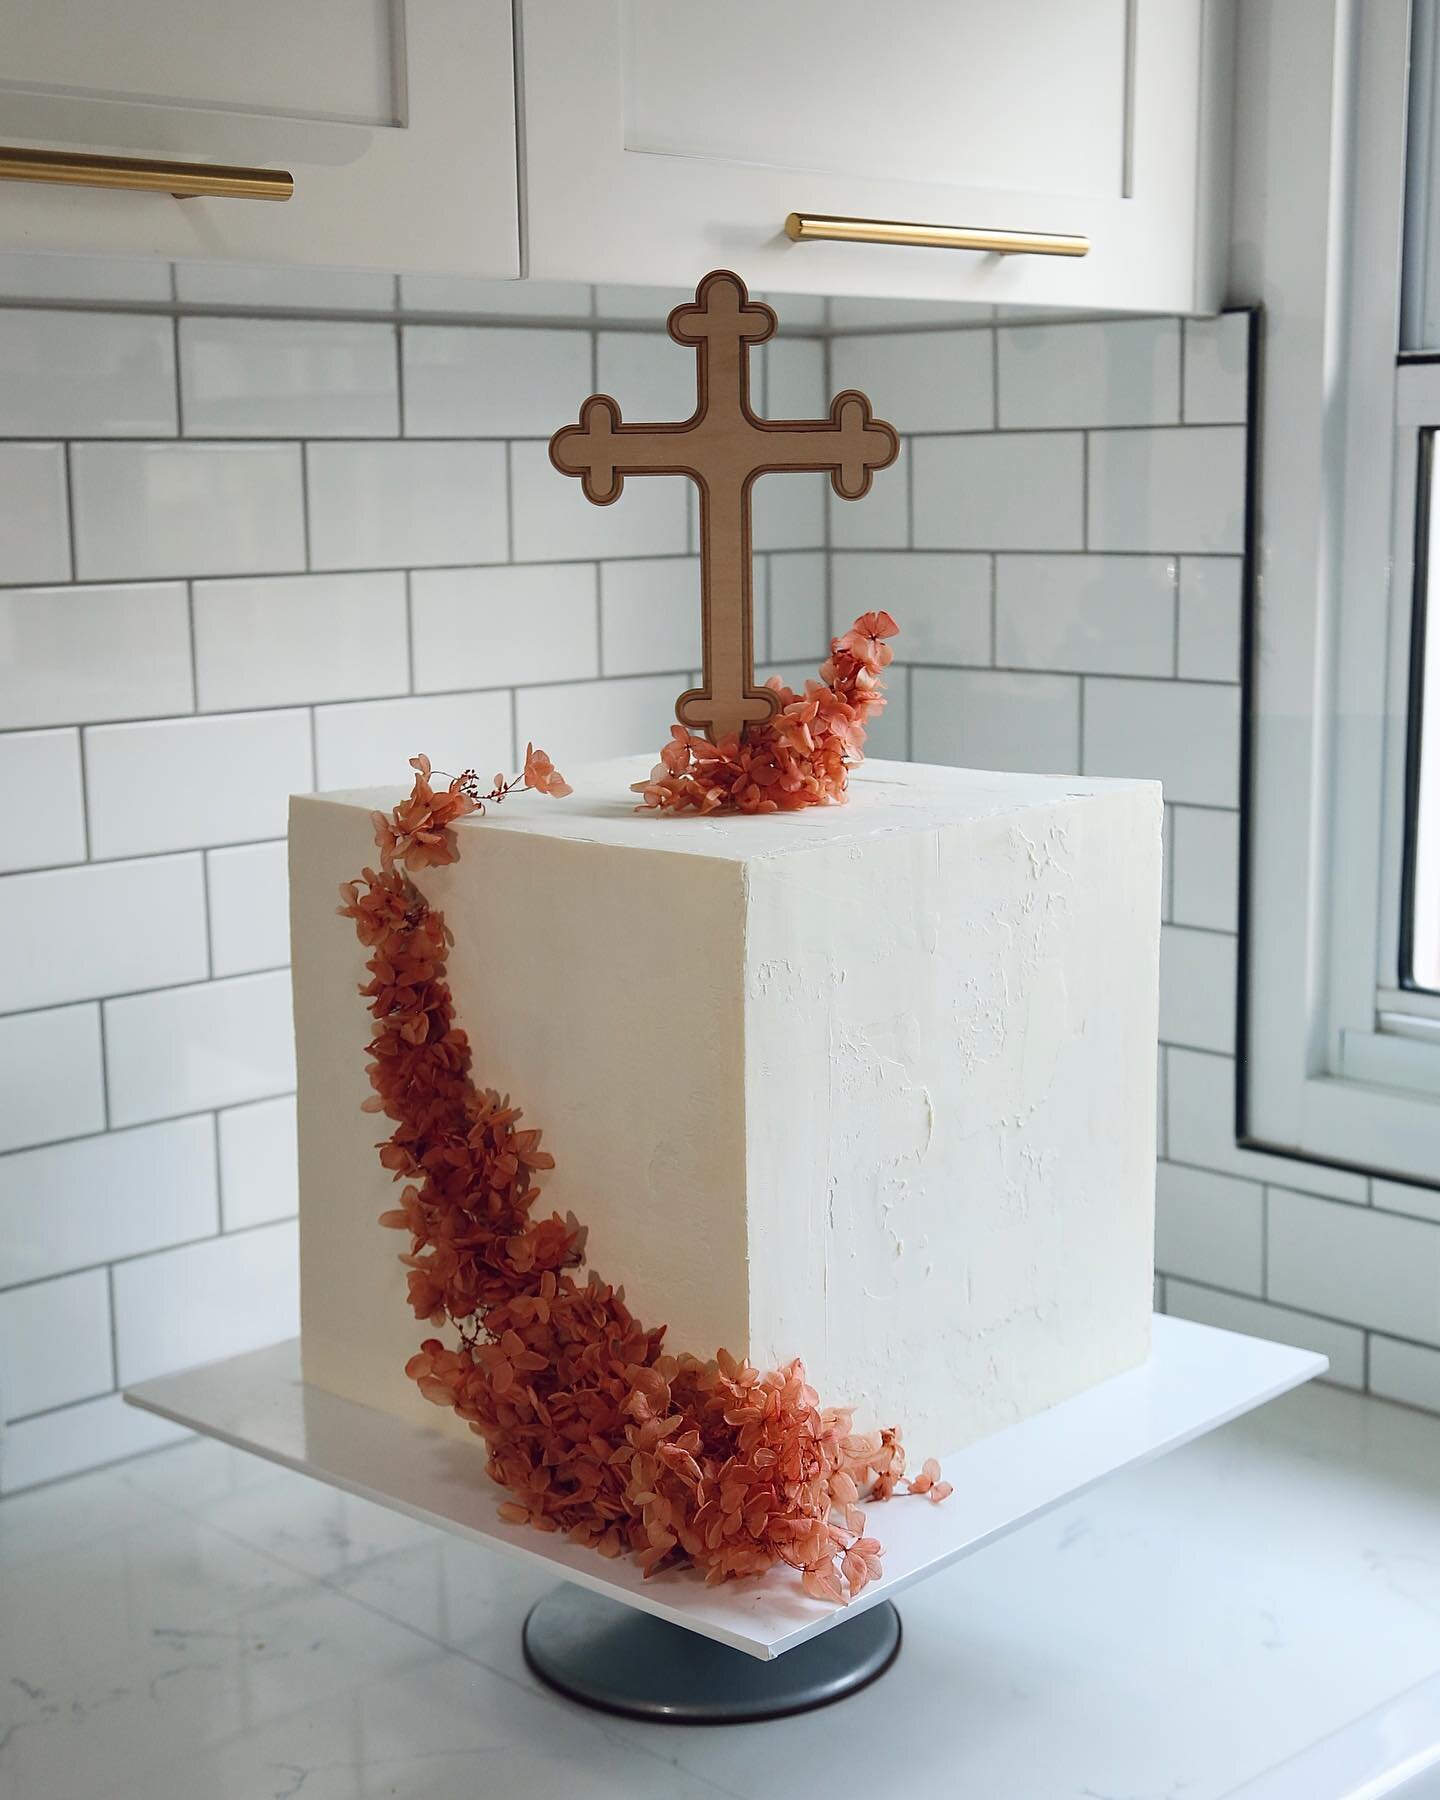 Balancing a sharp stone finish with delicate and soft hydrangea 🤓 loved everything about creating this Baptism cake🤍 Wooden cross custom cut by @petite_decor #violamariecakes